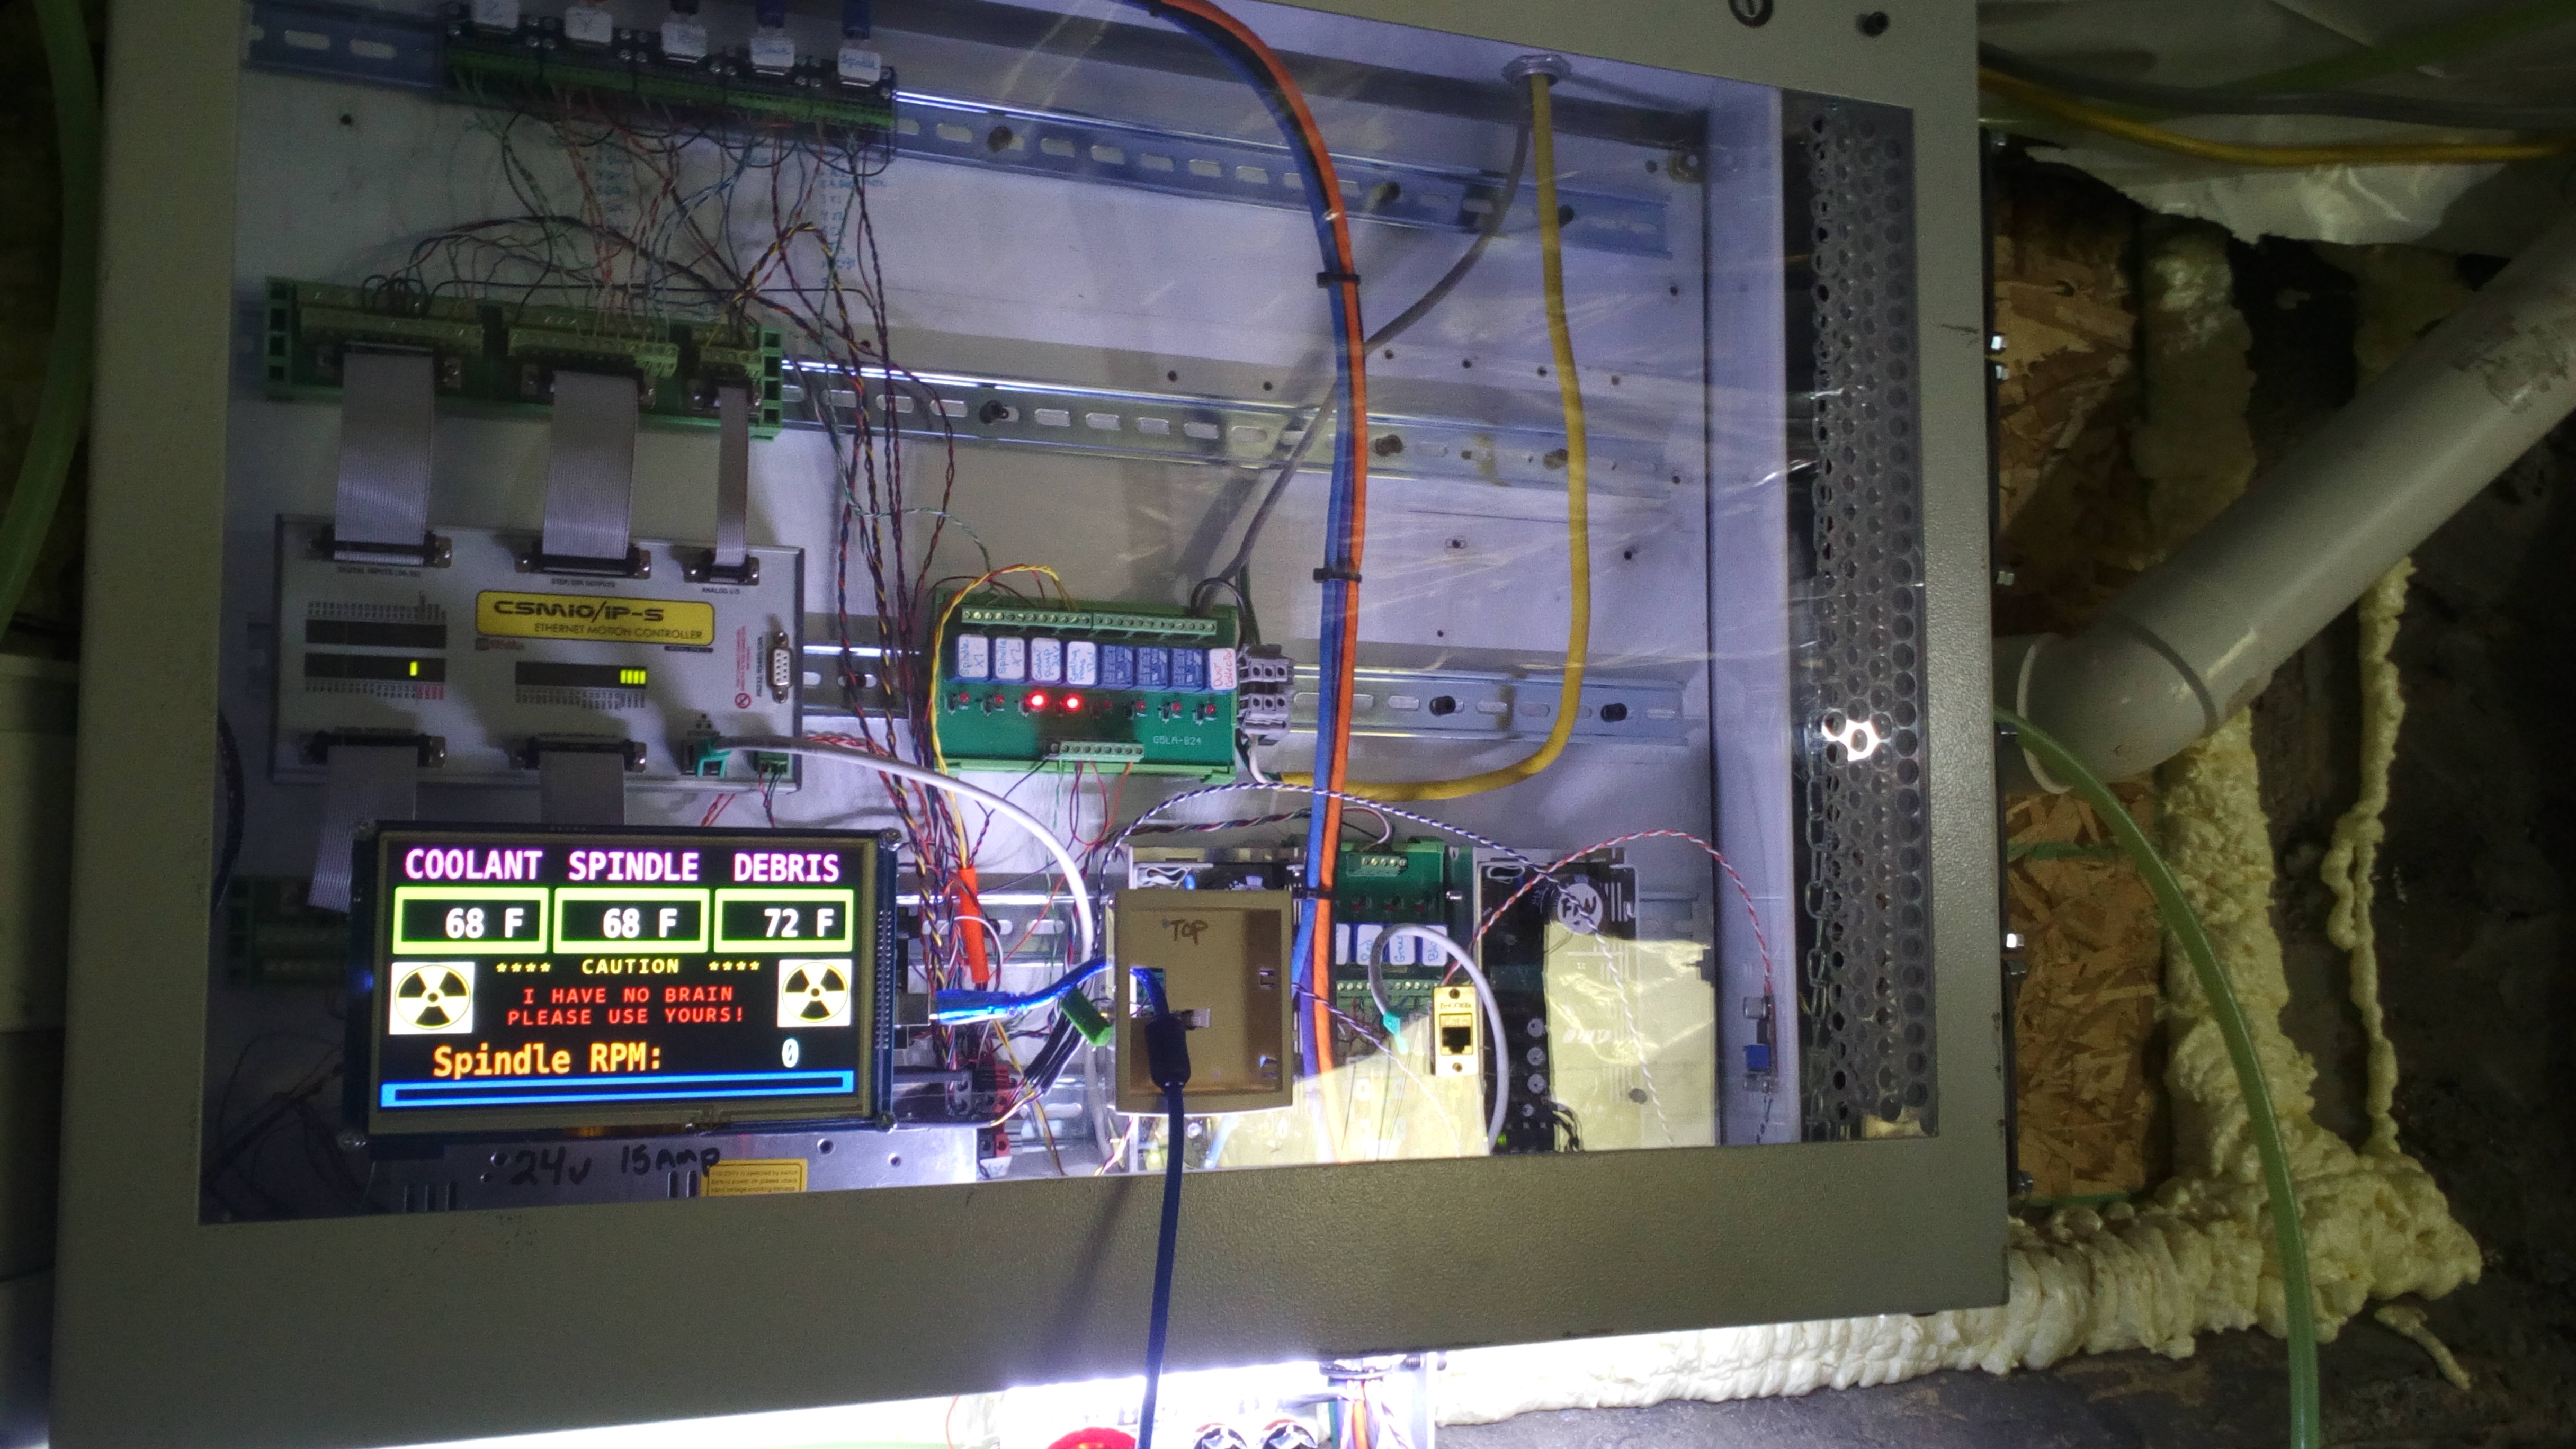 control panel, before i added the 110v relays for the vacuums